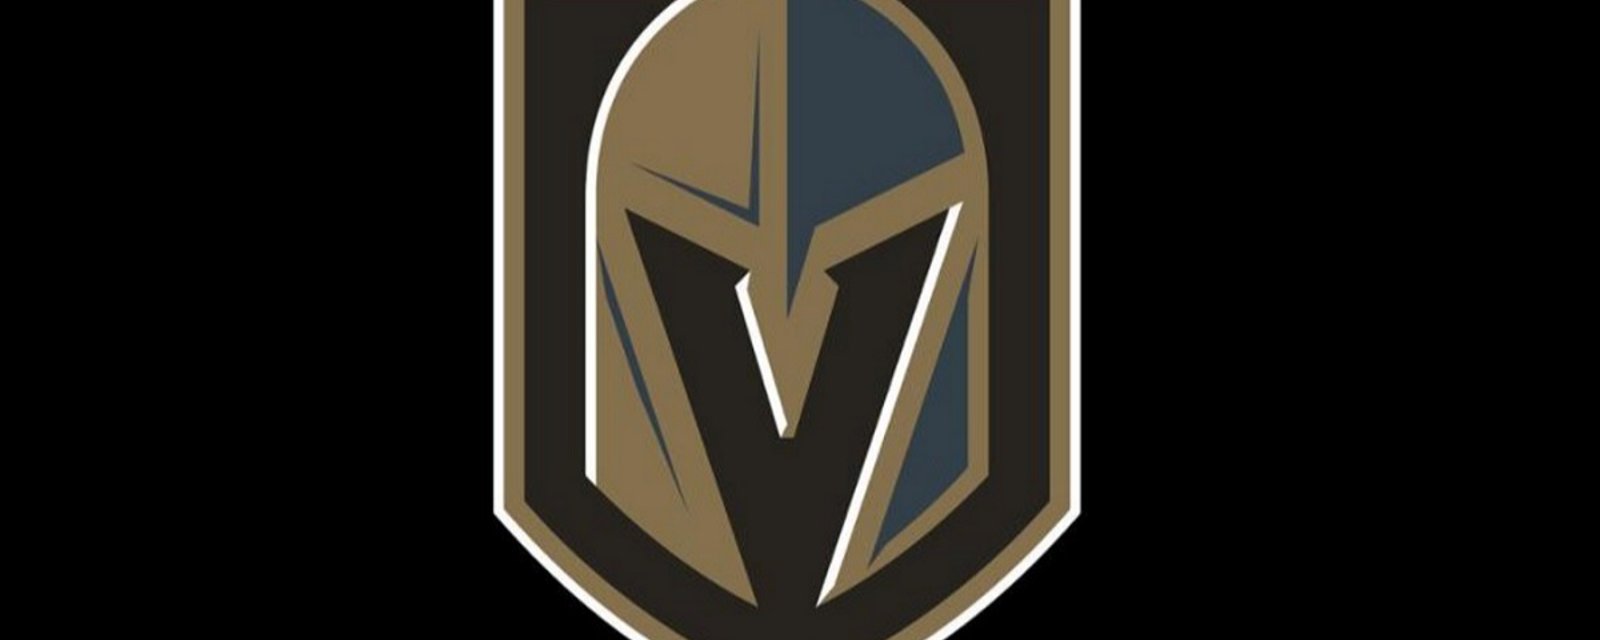 Five names emerge as candidates to be the first head coach of the Golden Knights.